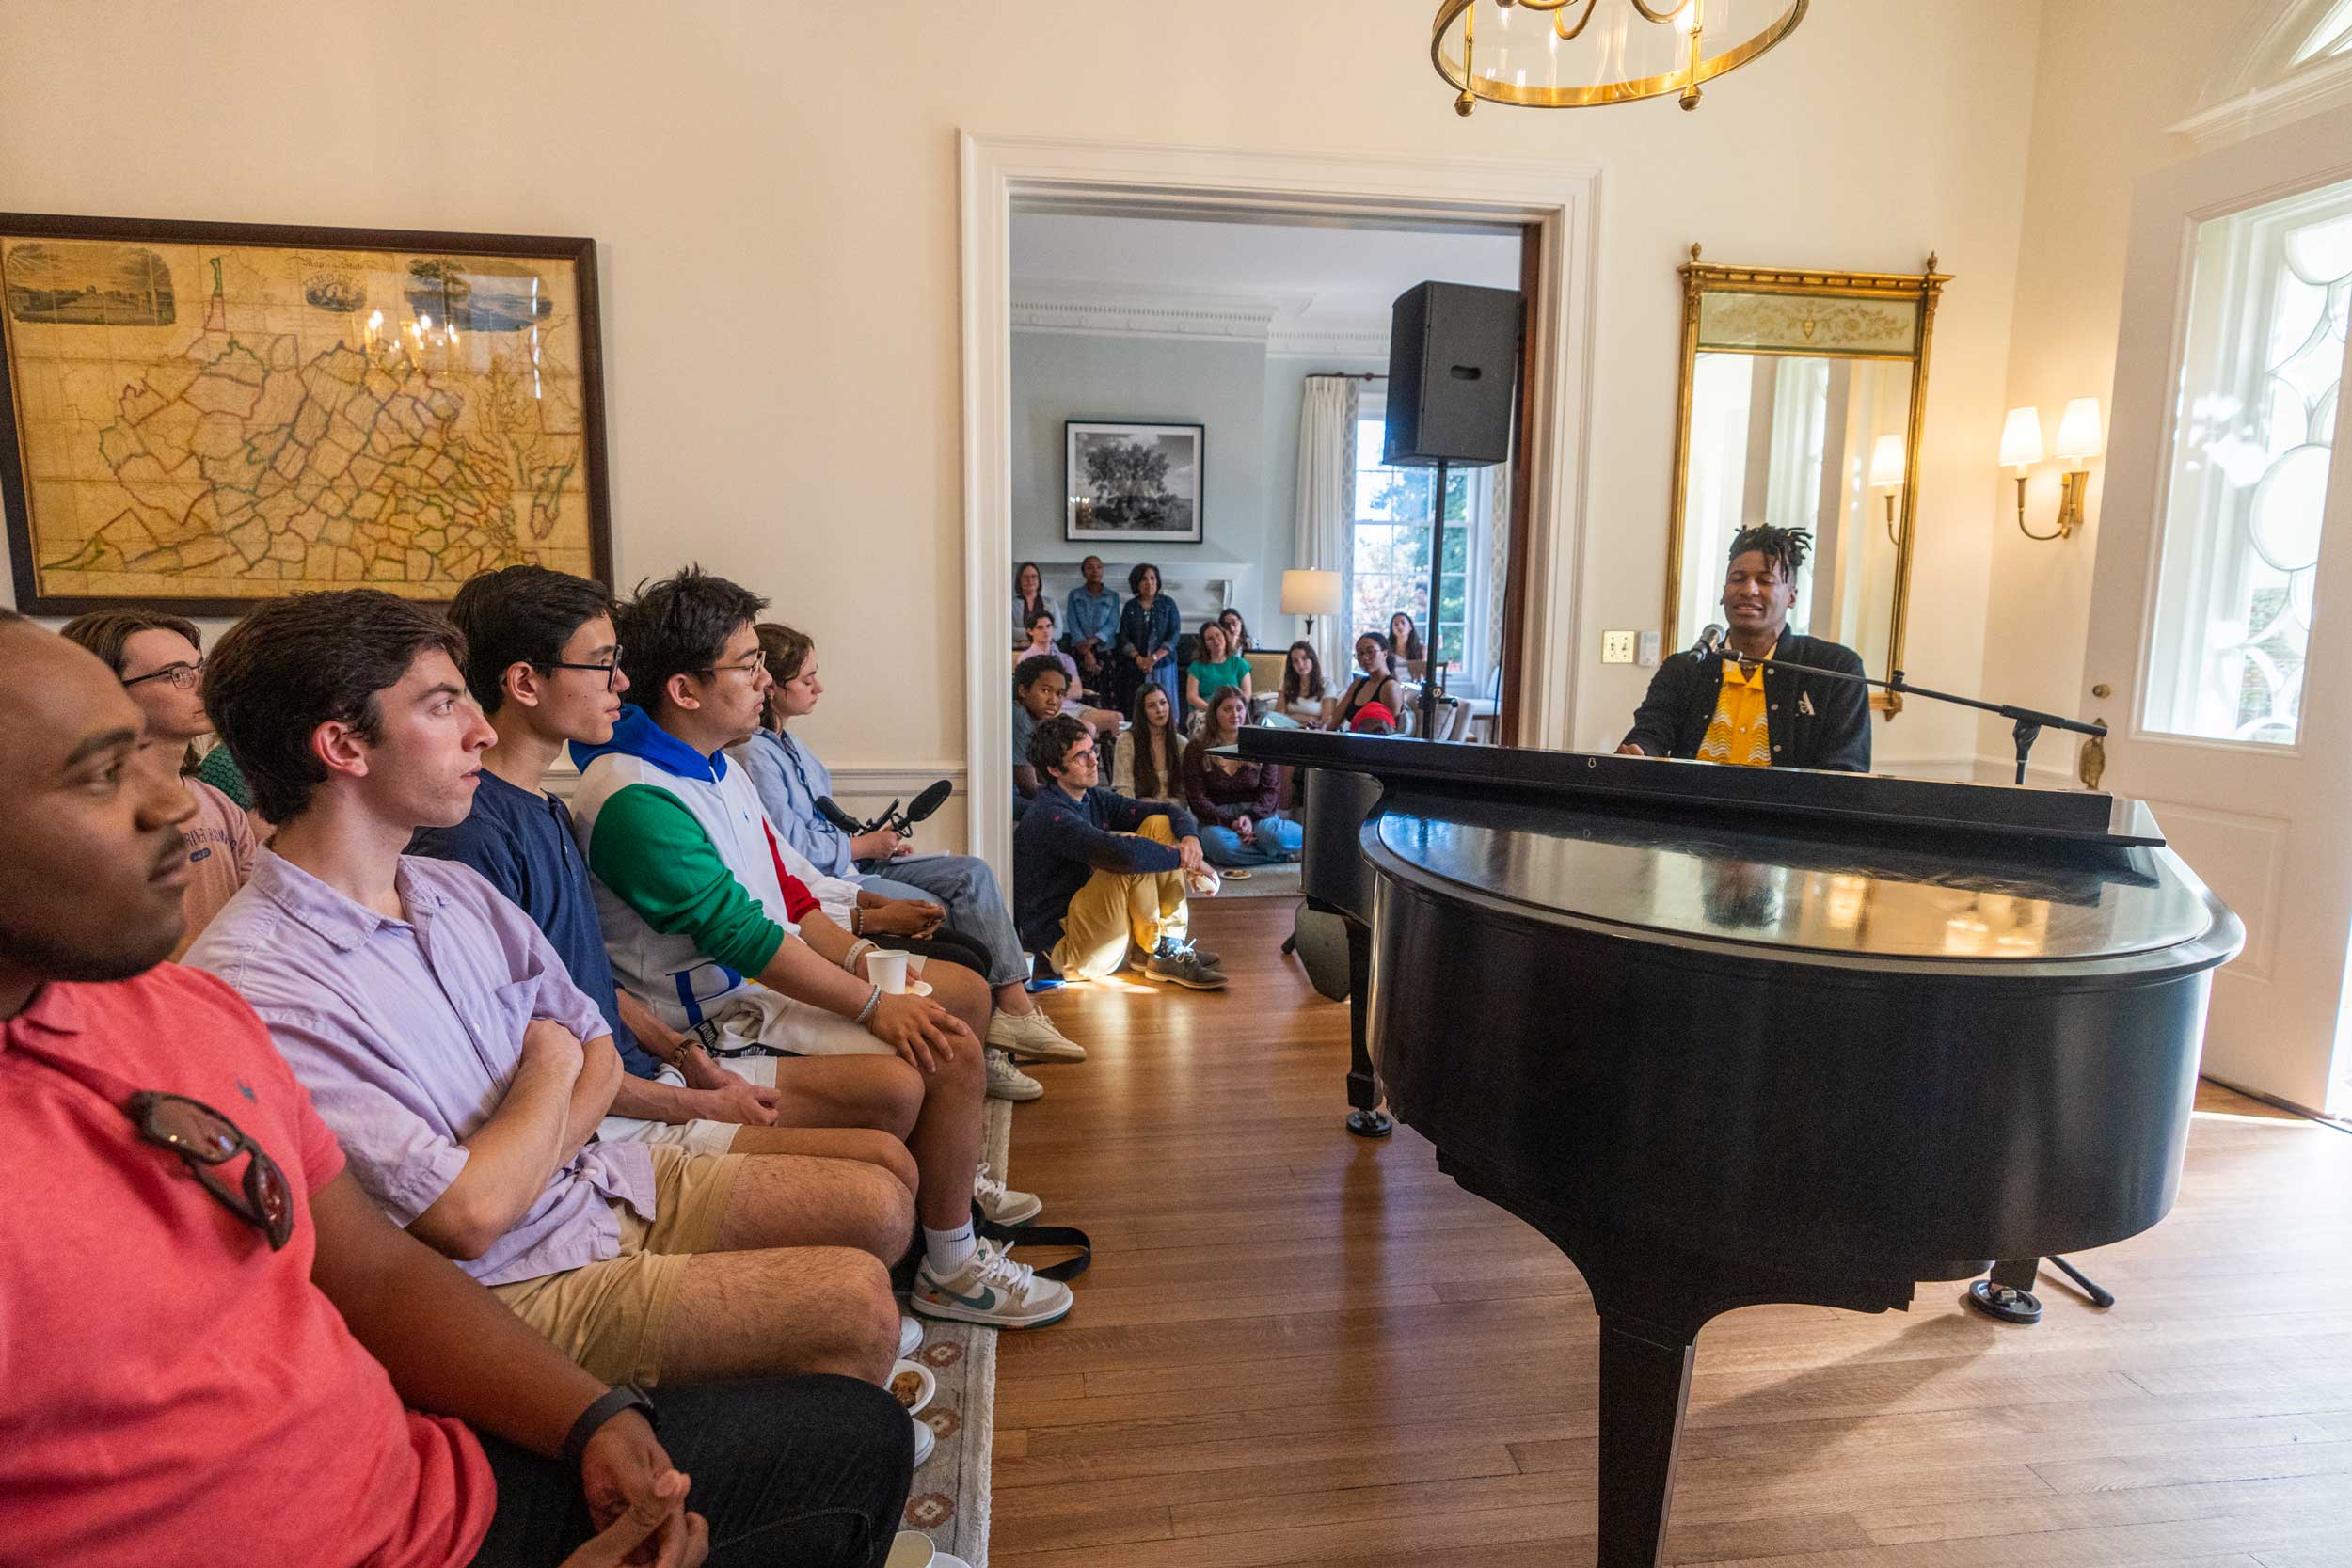 Audience members look on as musician Jon Batiste sings and plays the piano at Carr's Hill